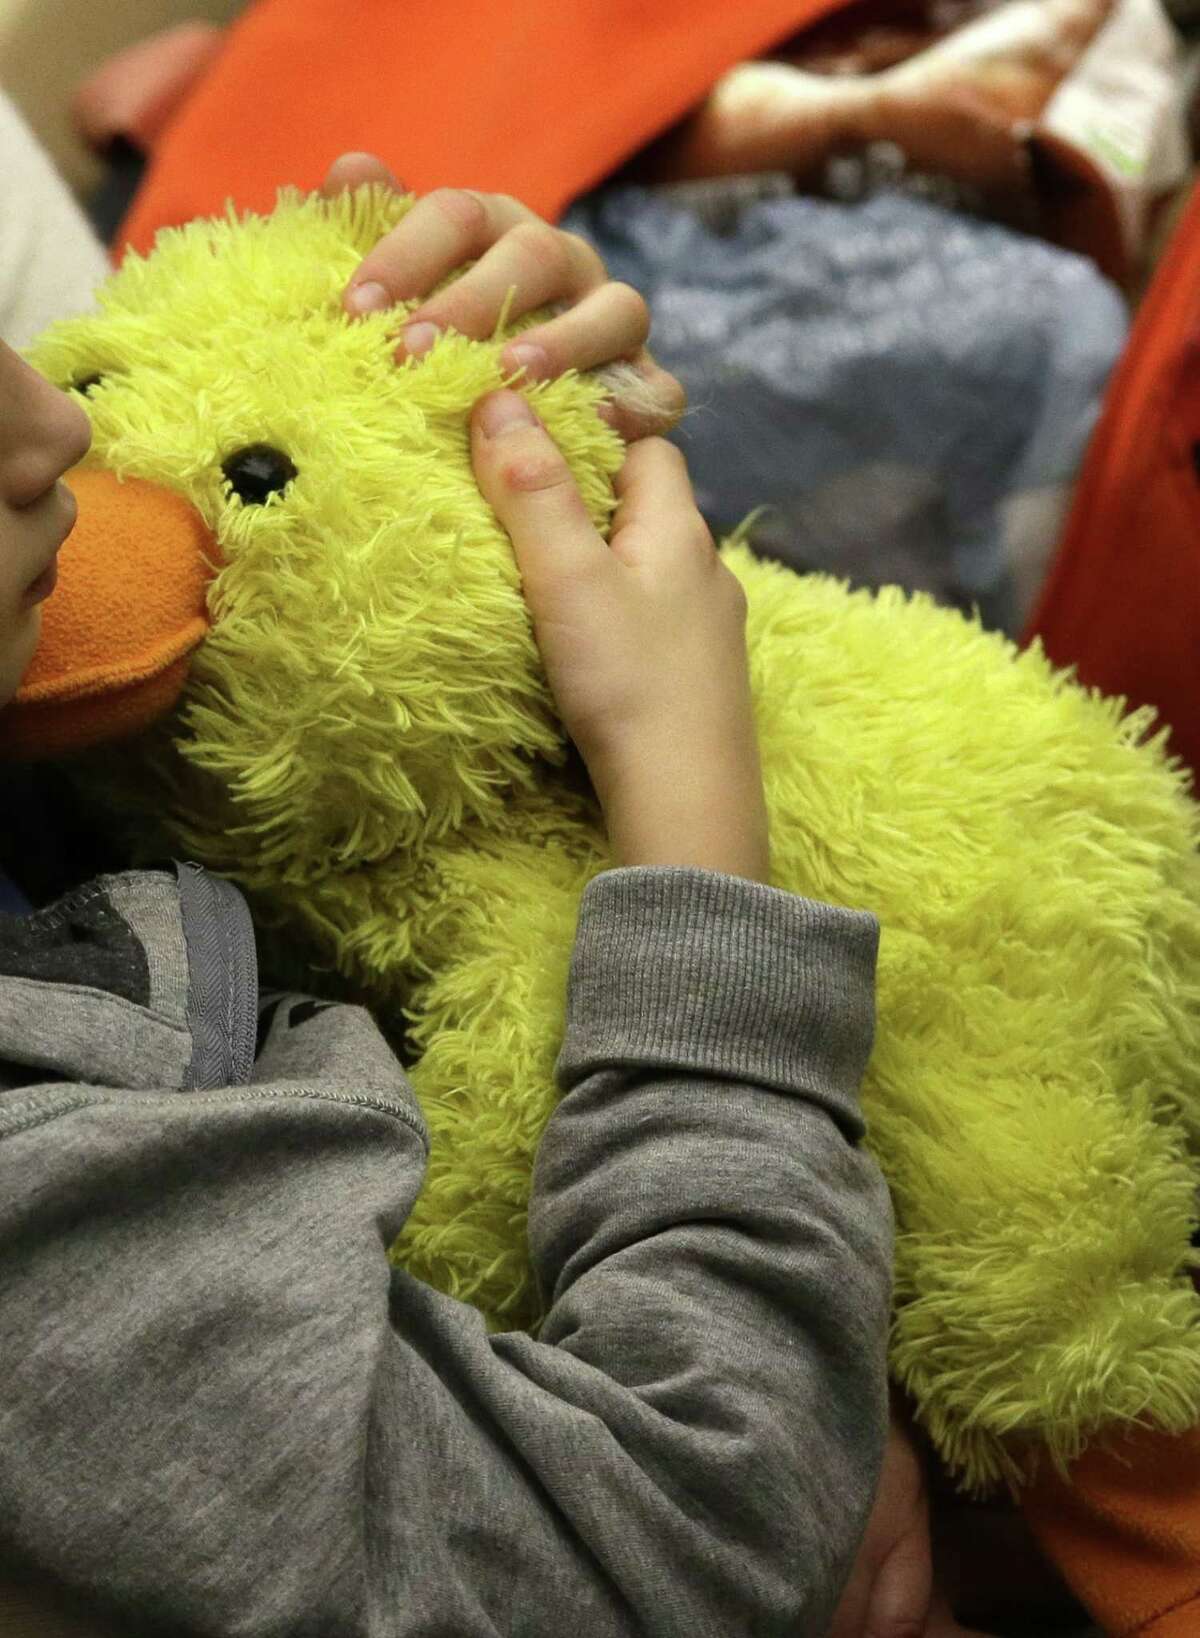 A child hugs her puppet at the end of an audience that Pope Francis held with health care workers and children with autism in the Paul VI hall at the Vatican, Saturday, Nov. 22, 2014. Pope Francis tenderly embraced children with autism spectrum disorders, during an audience Saturday aimed at offering solidarity to people living with the condition.